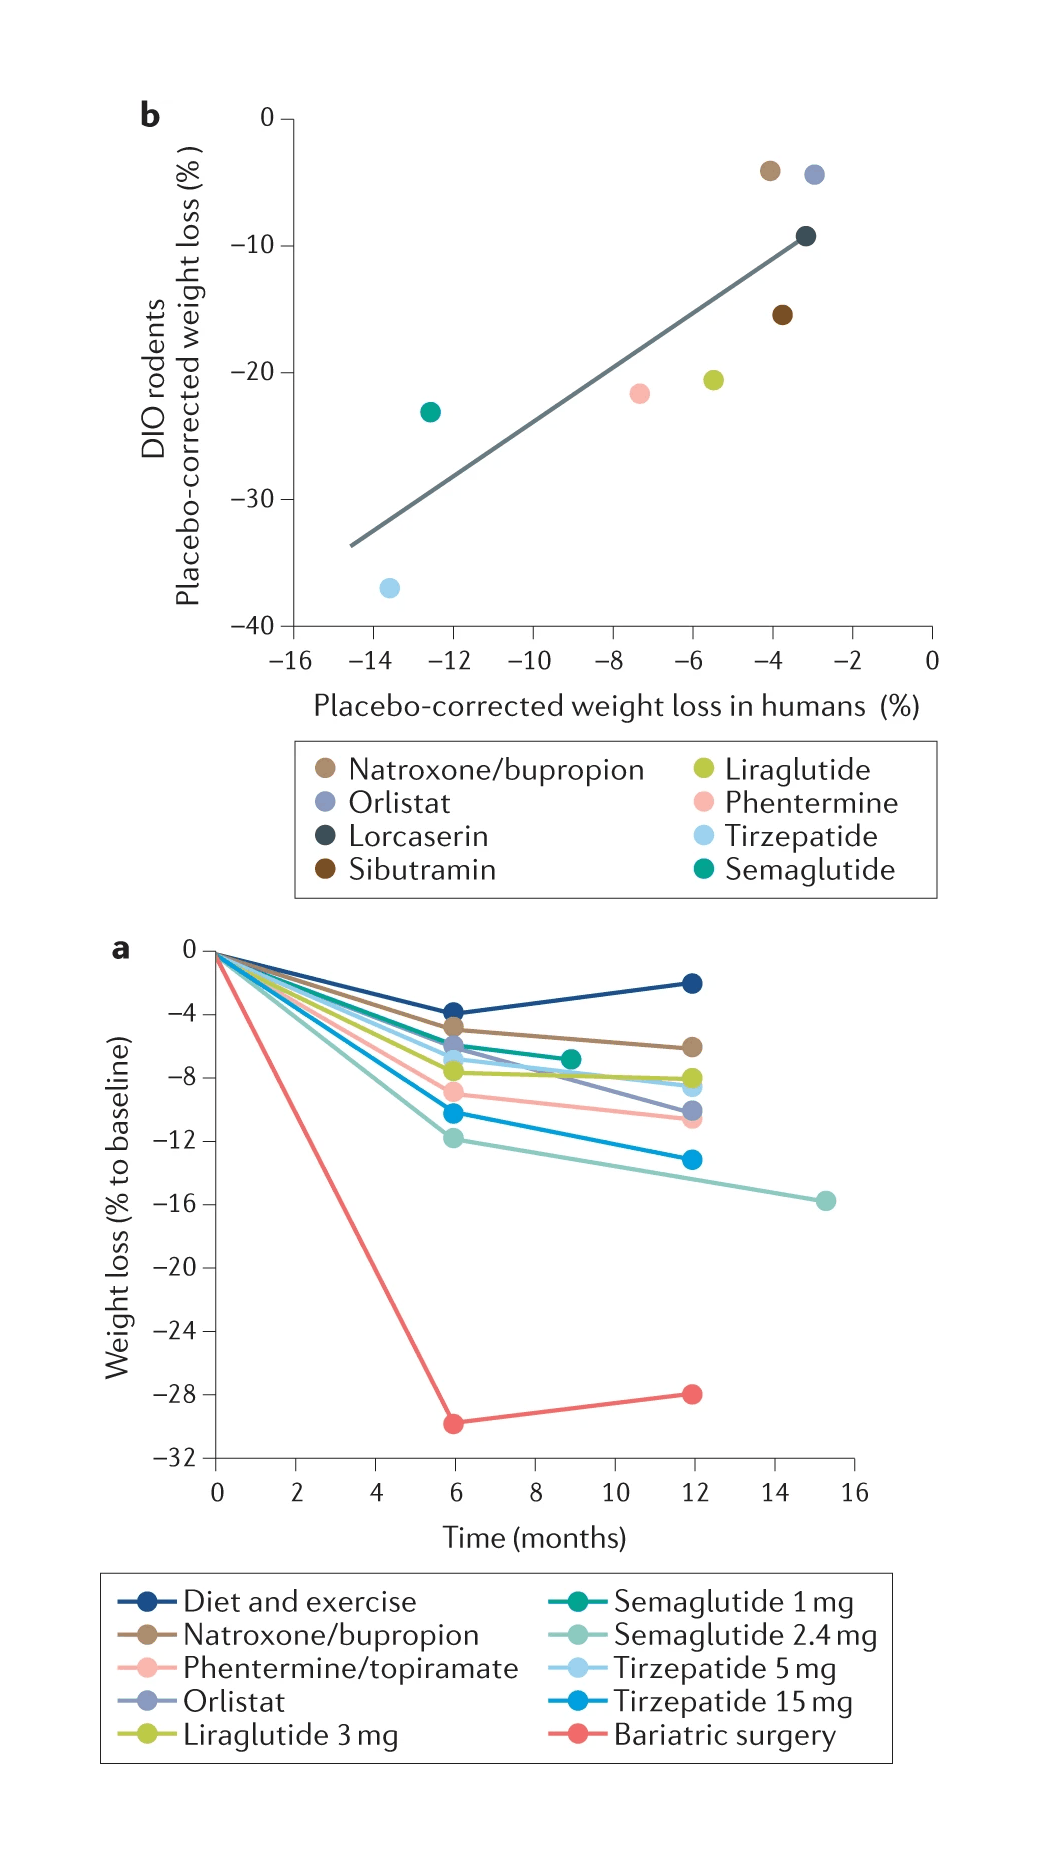 Figure 3: Body weight loss by AOMs in humans and rodents. Body weight loss achieved through lifestyle changes, currently approved anti-obesity medications (AOMs) and bariatric surgery (part a) and correlation of drug-induced body weight loss in rodents and humans (part b). Data in panel a refer to liraglutide, orlistat, naltrexone/​bupropion, phentermine/​topiramate, semaglutide 1 mg, semaglutide 2.4 mg, and tirzepatide (5 and 15 mg). Data in panel b refer to naltrexone/​bupropion, orlistat, lorcaserin, sibutramine, liraglutide, phentermine, semaglutide, and tirzepatide.